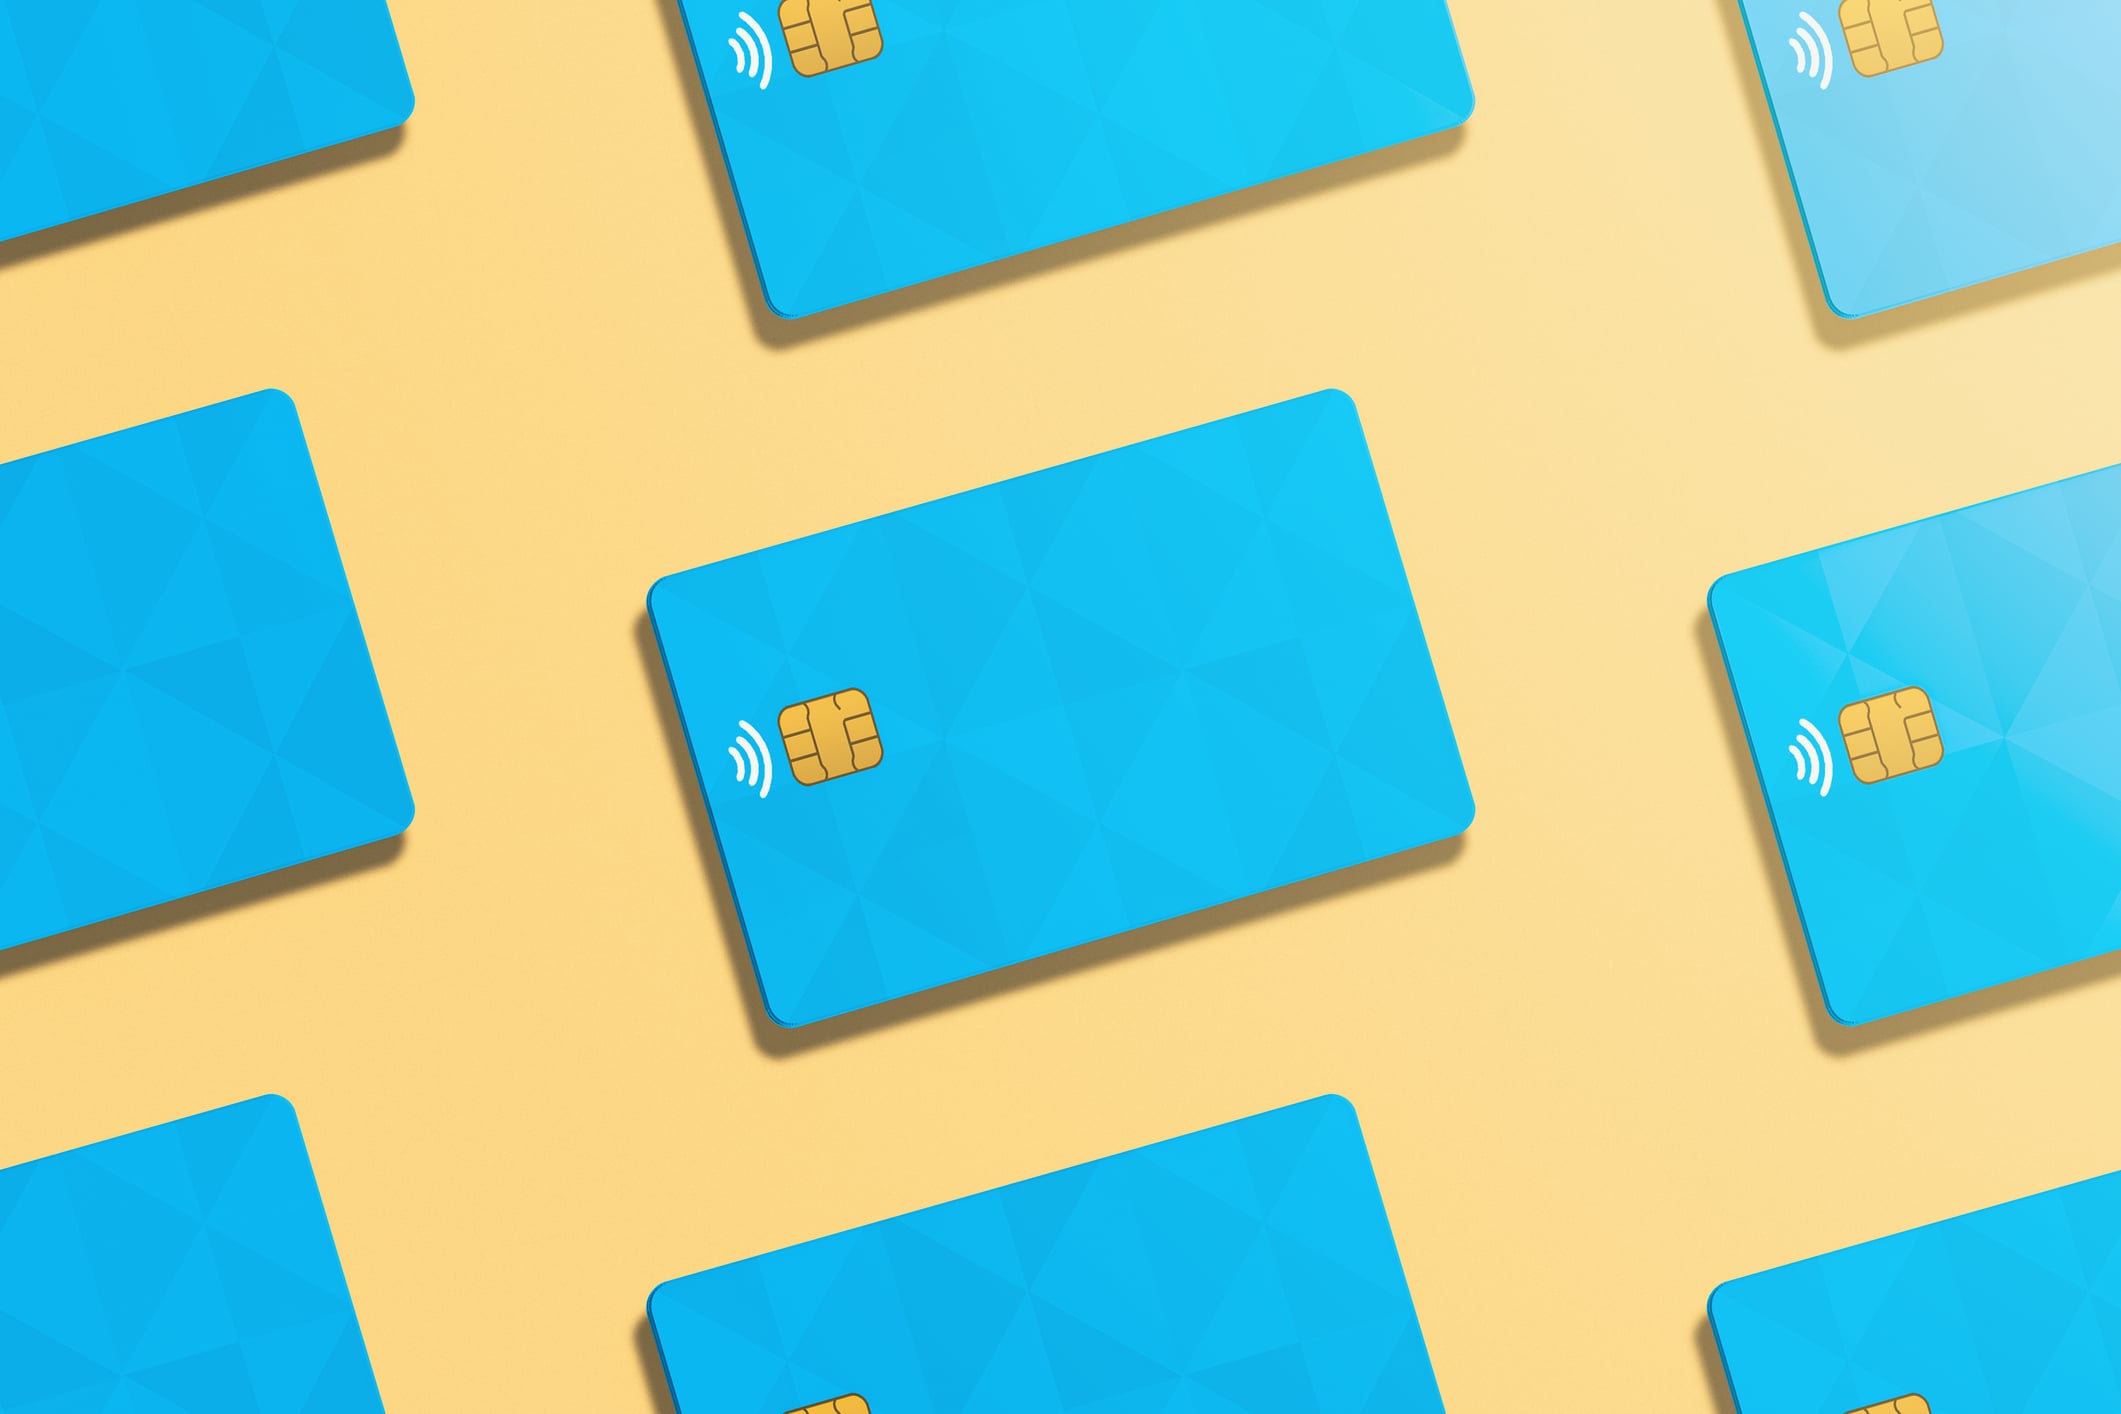 credit cards - rows of blue cards on an orange background.